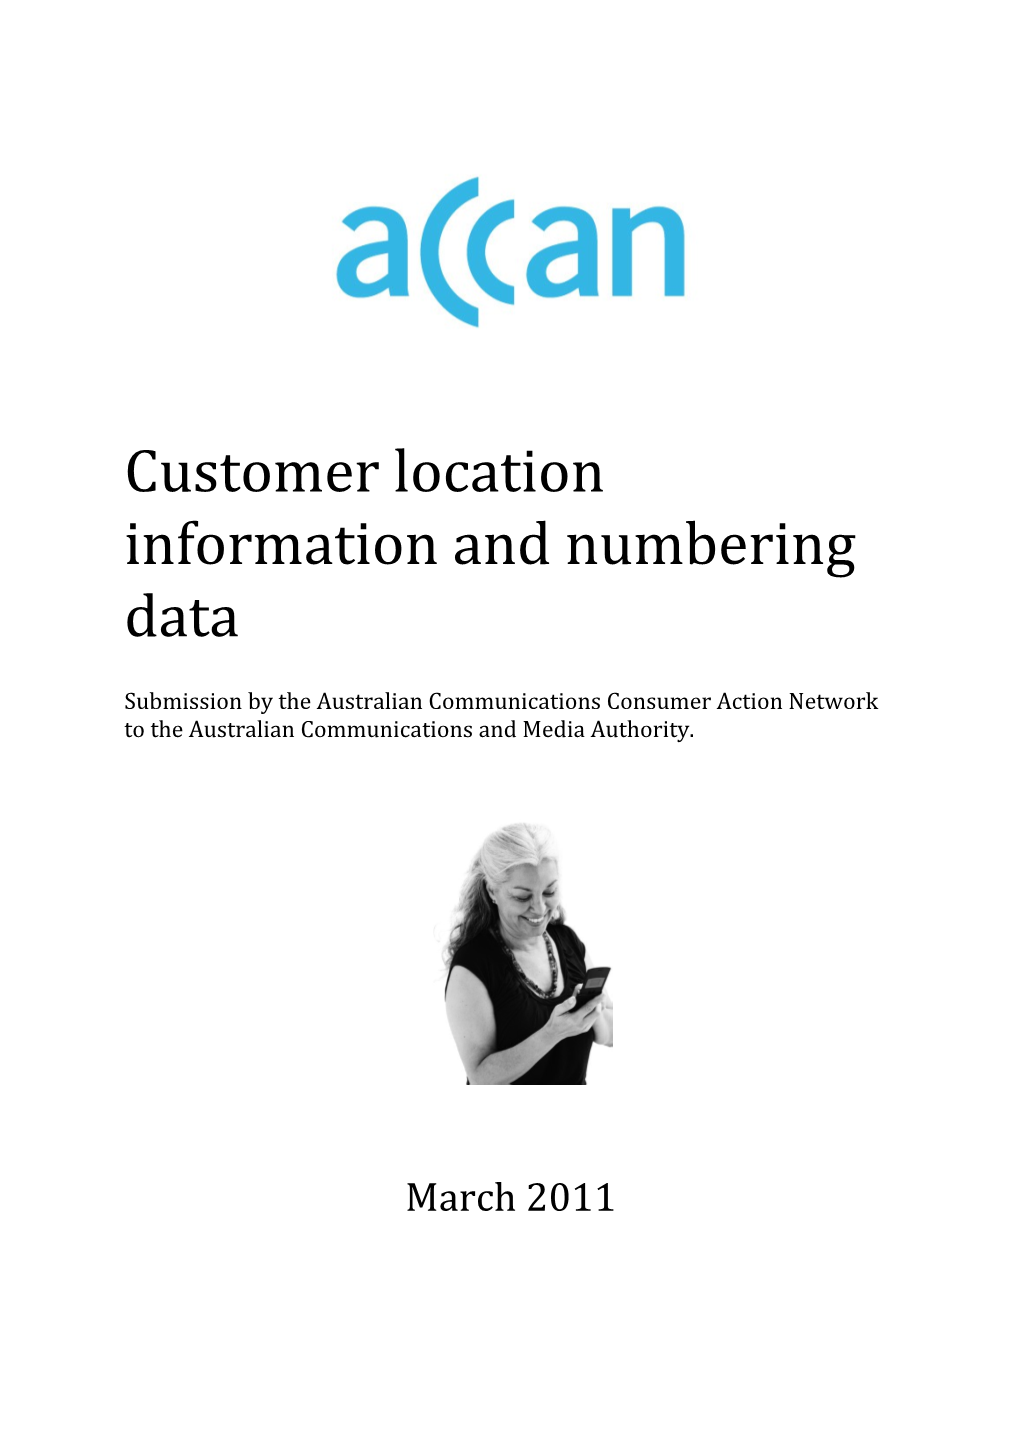 Customer Location Information and Numbering Data